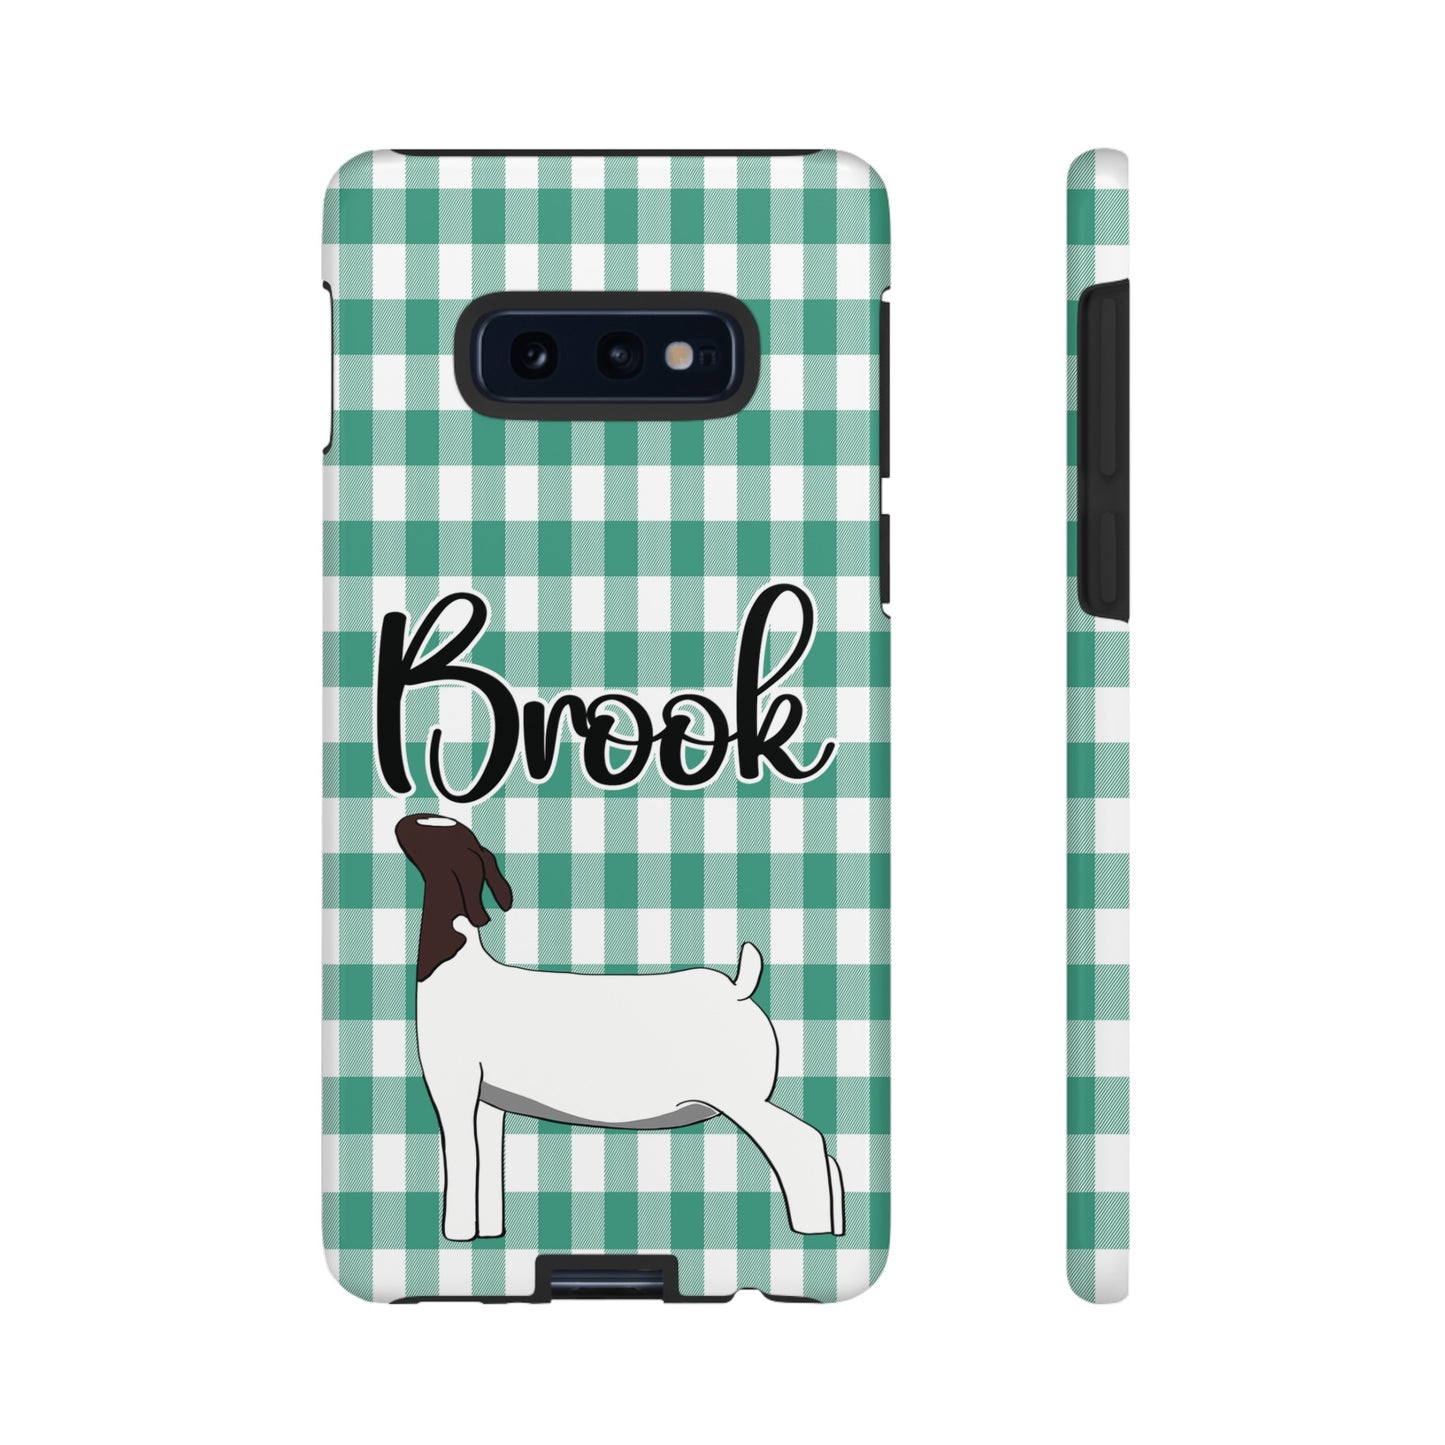 Livestock Show Goat - Android Goat Phone Cases